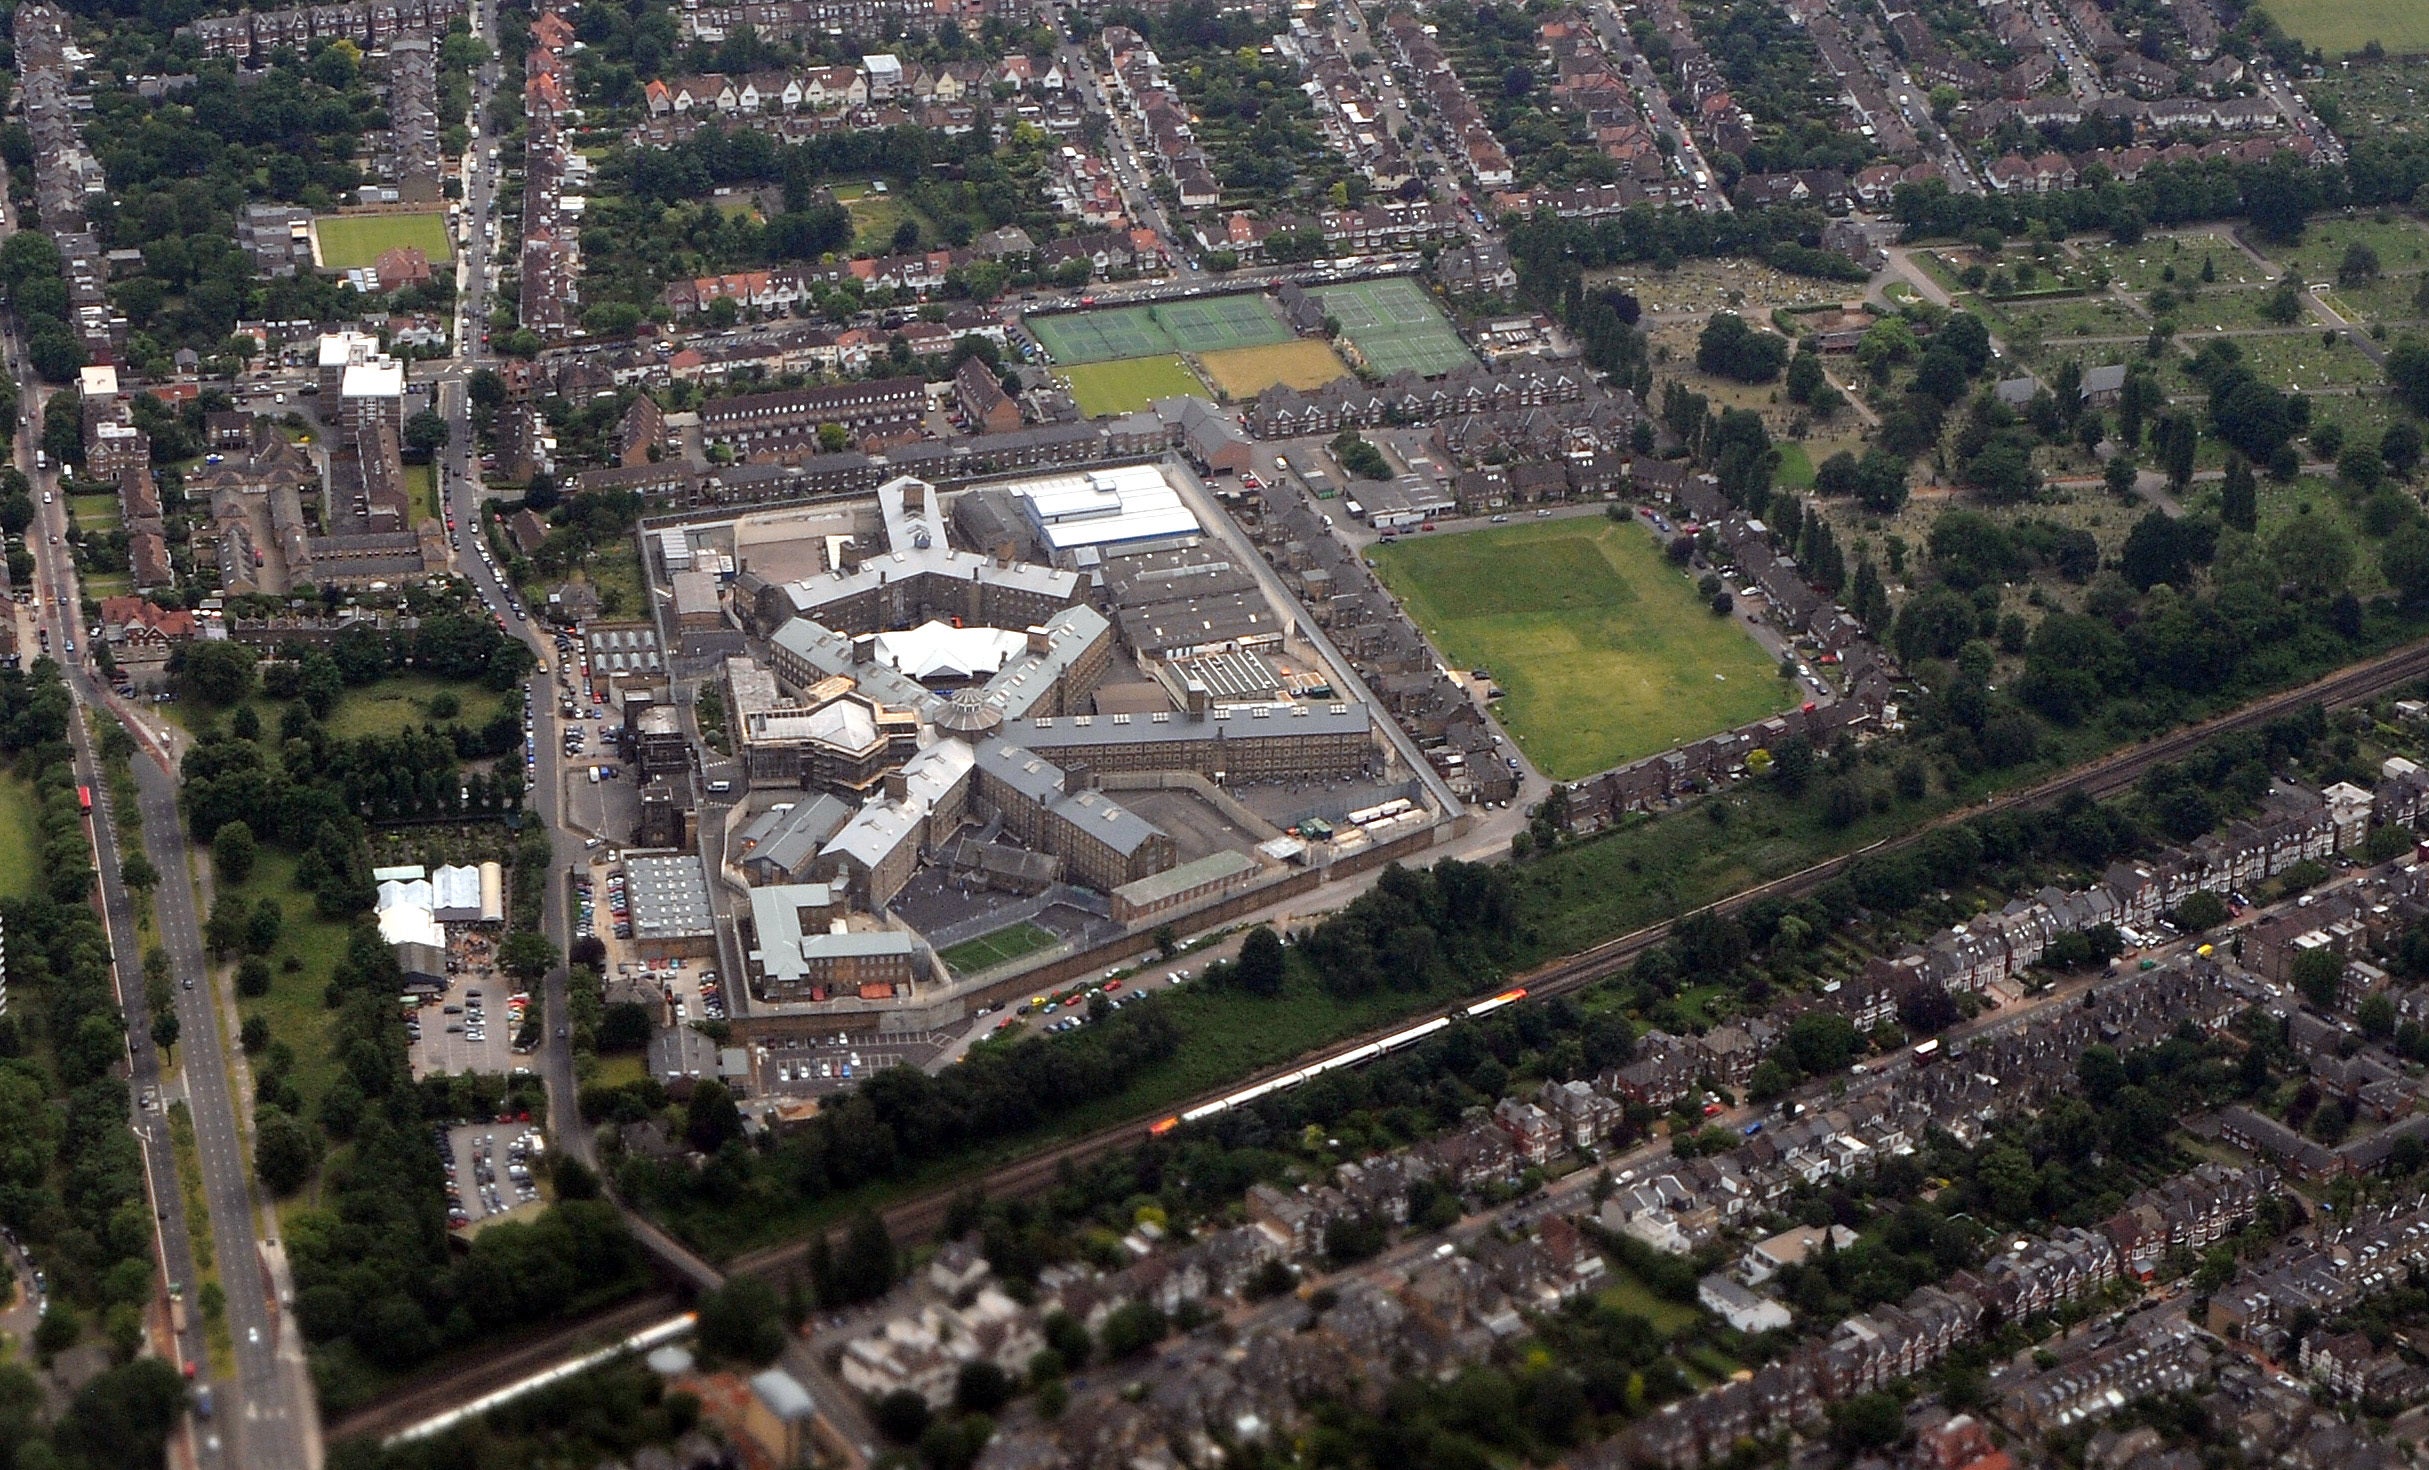 General view of Wandsworth Prison, taken from a commercial airline, London